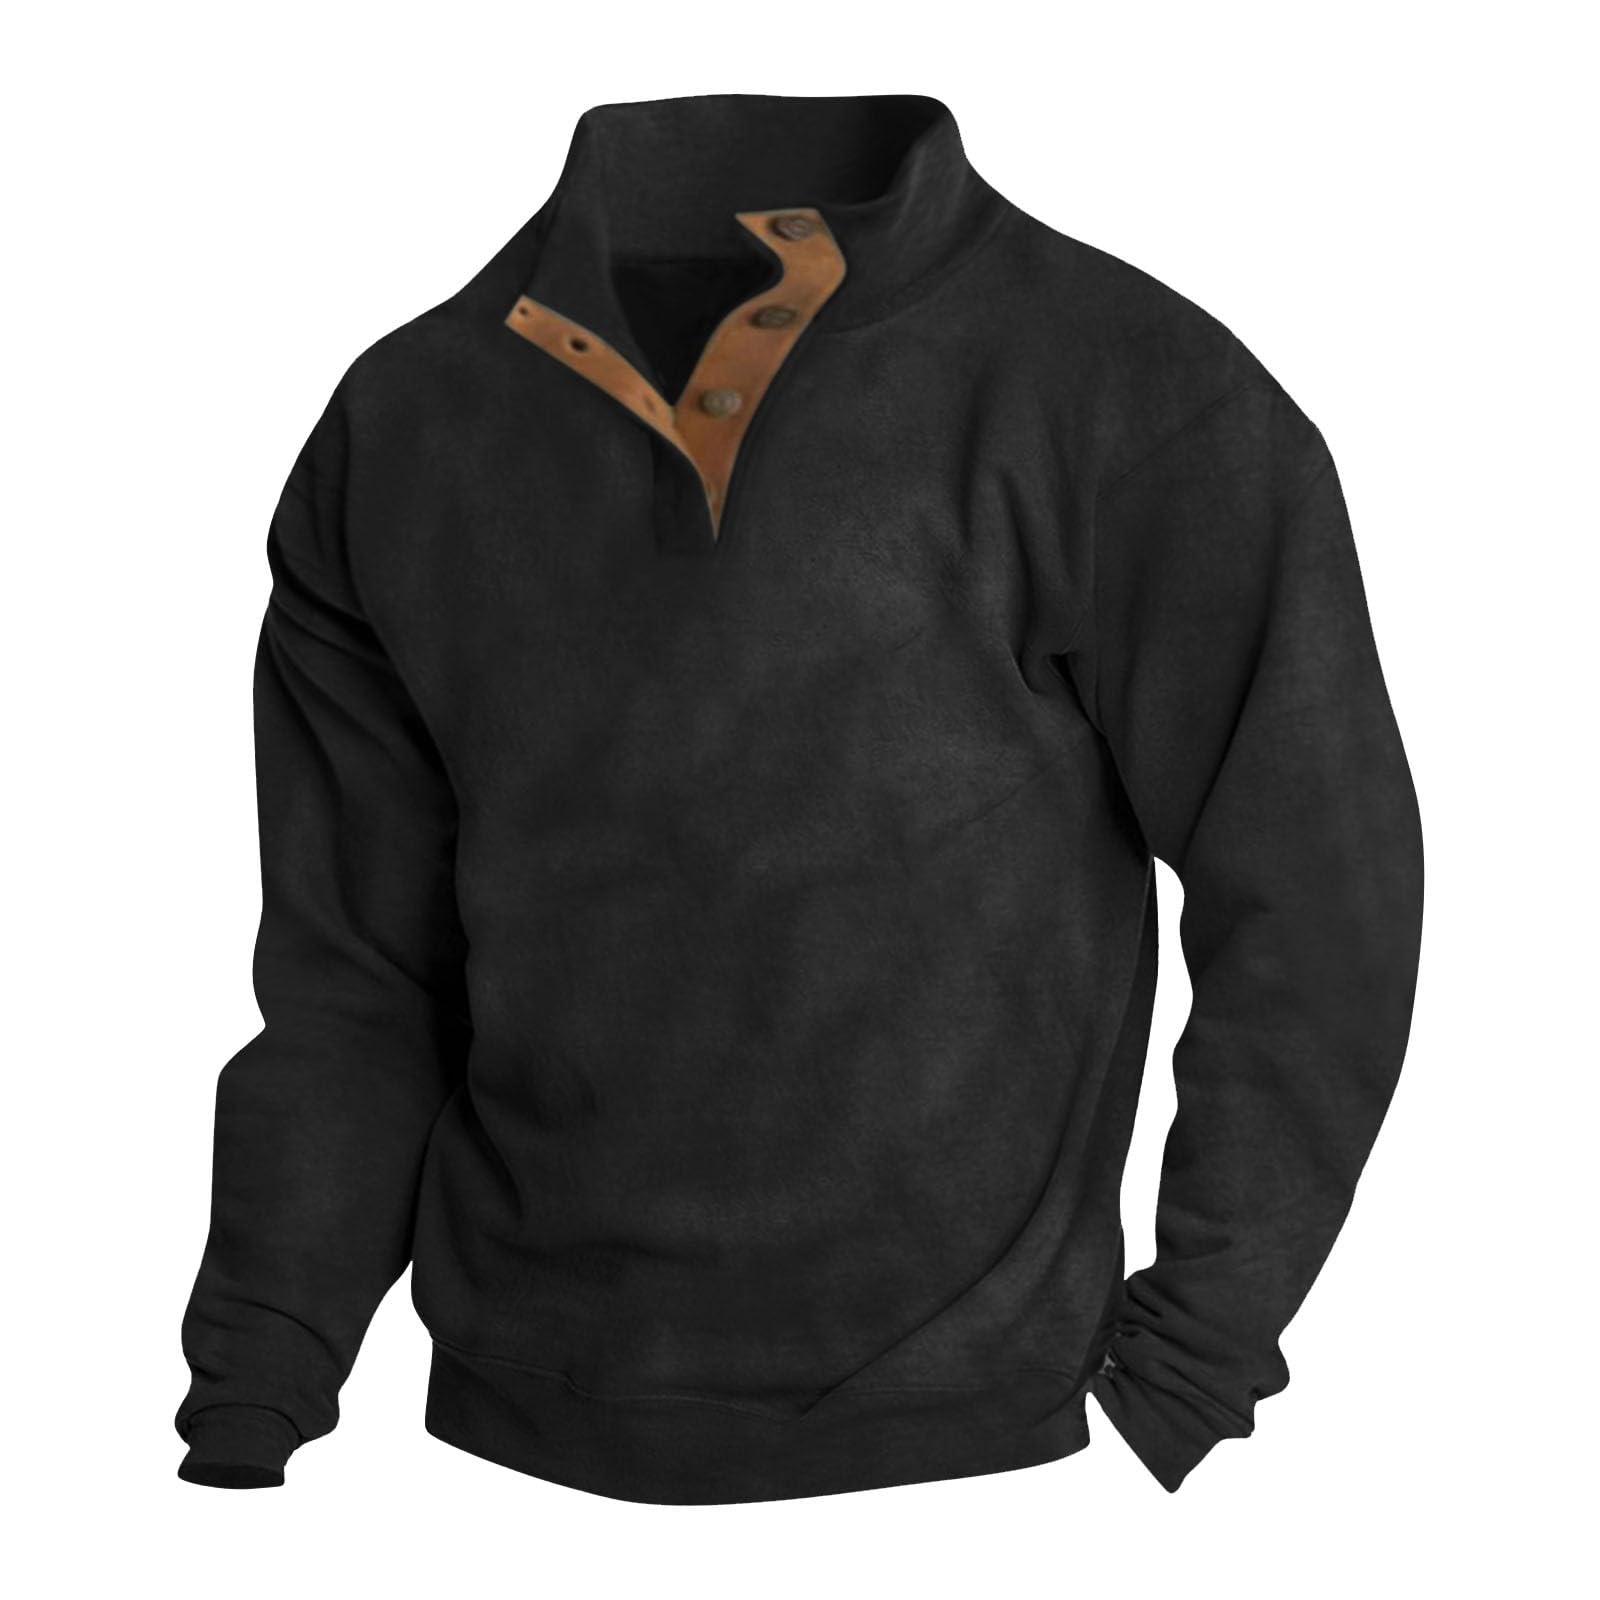 Black Friday 70% OFF- Men's Outdoor Casual Henley Golf Long Sleeve Swe